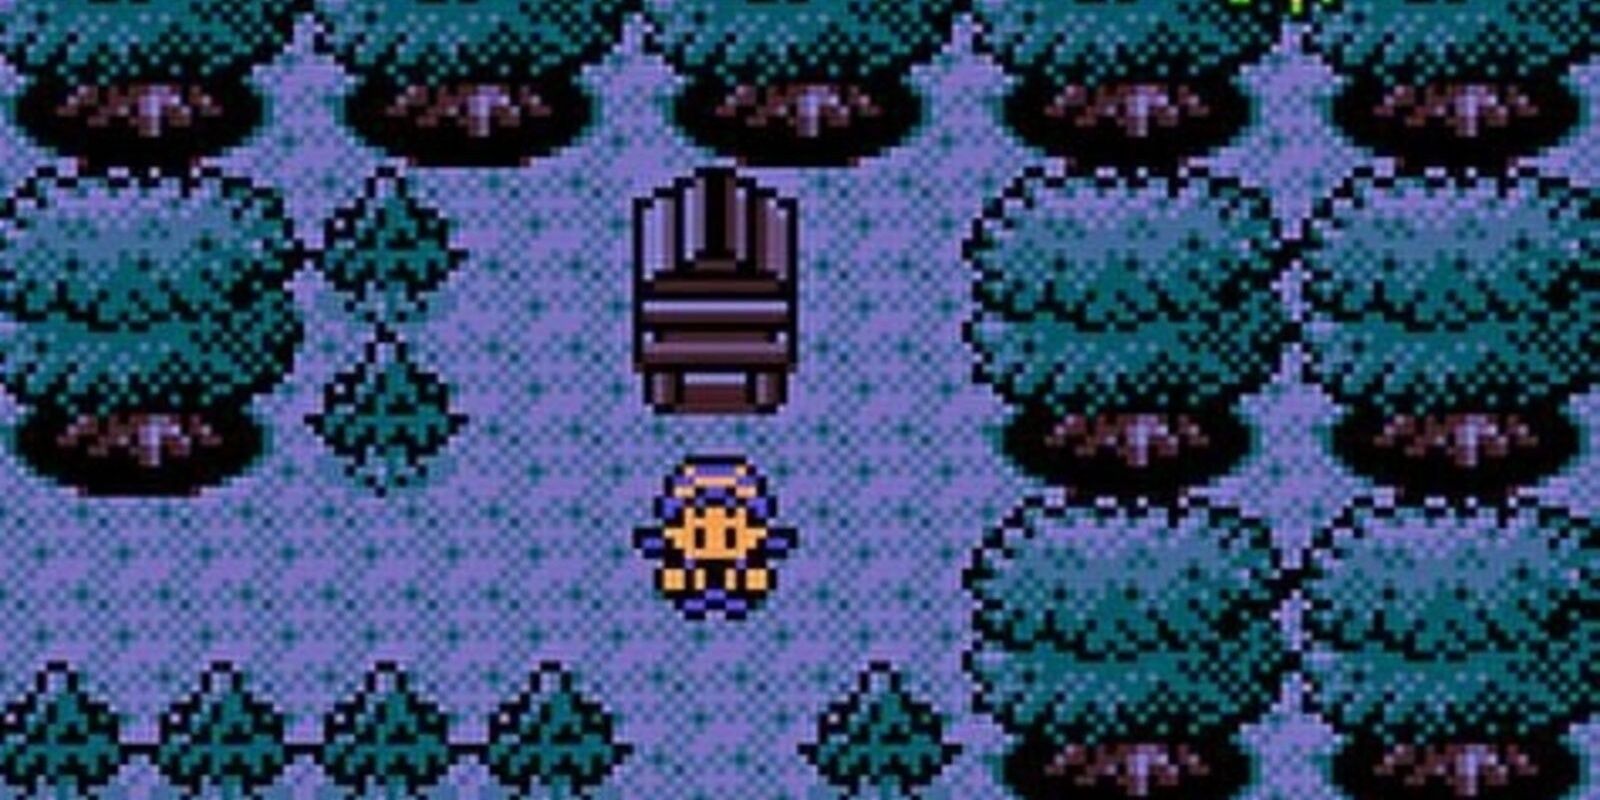 Pokemon Crystal at night in the forest, the player looks for Celebi